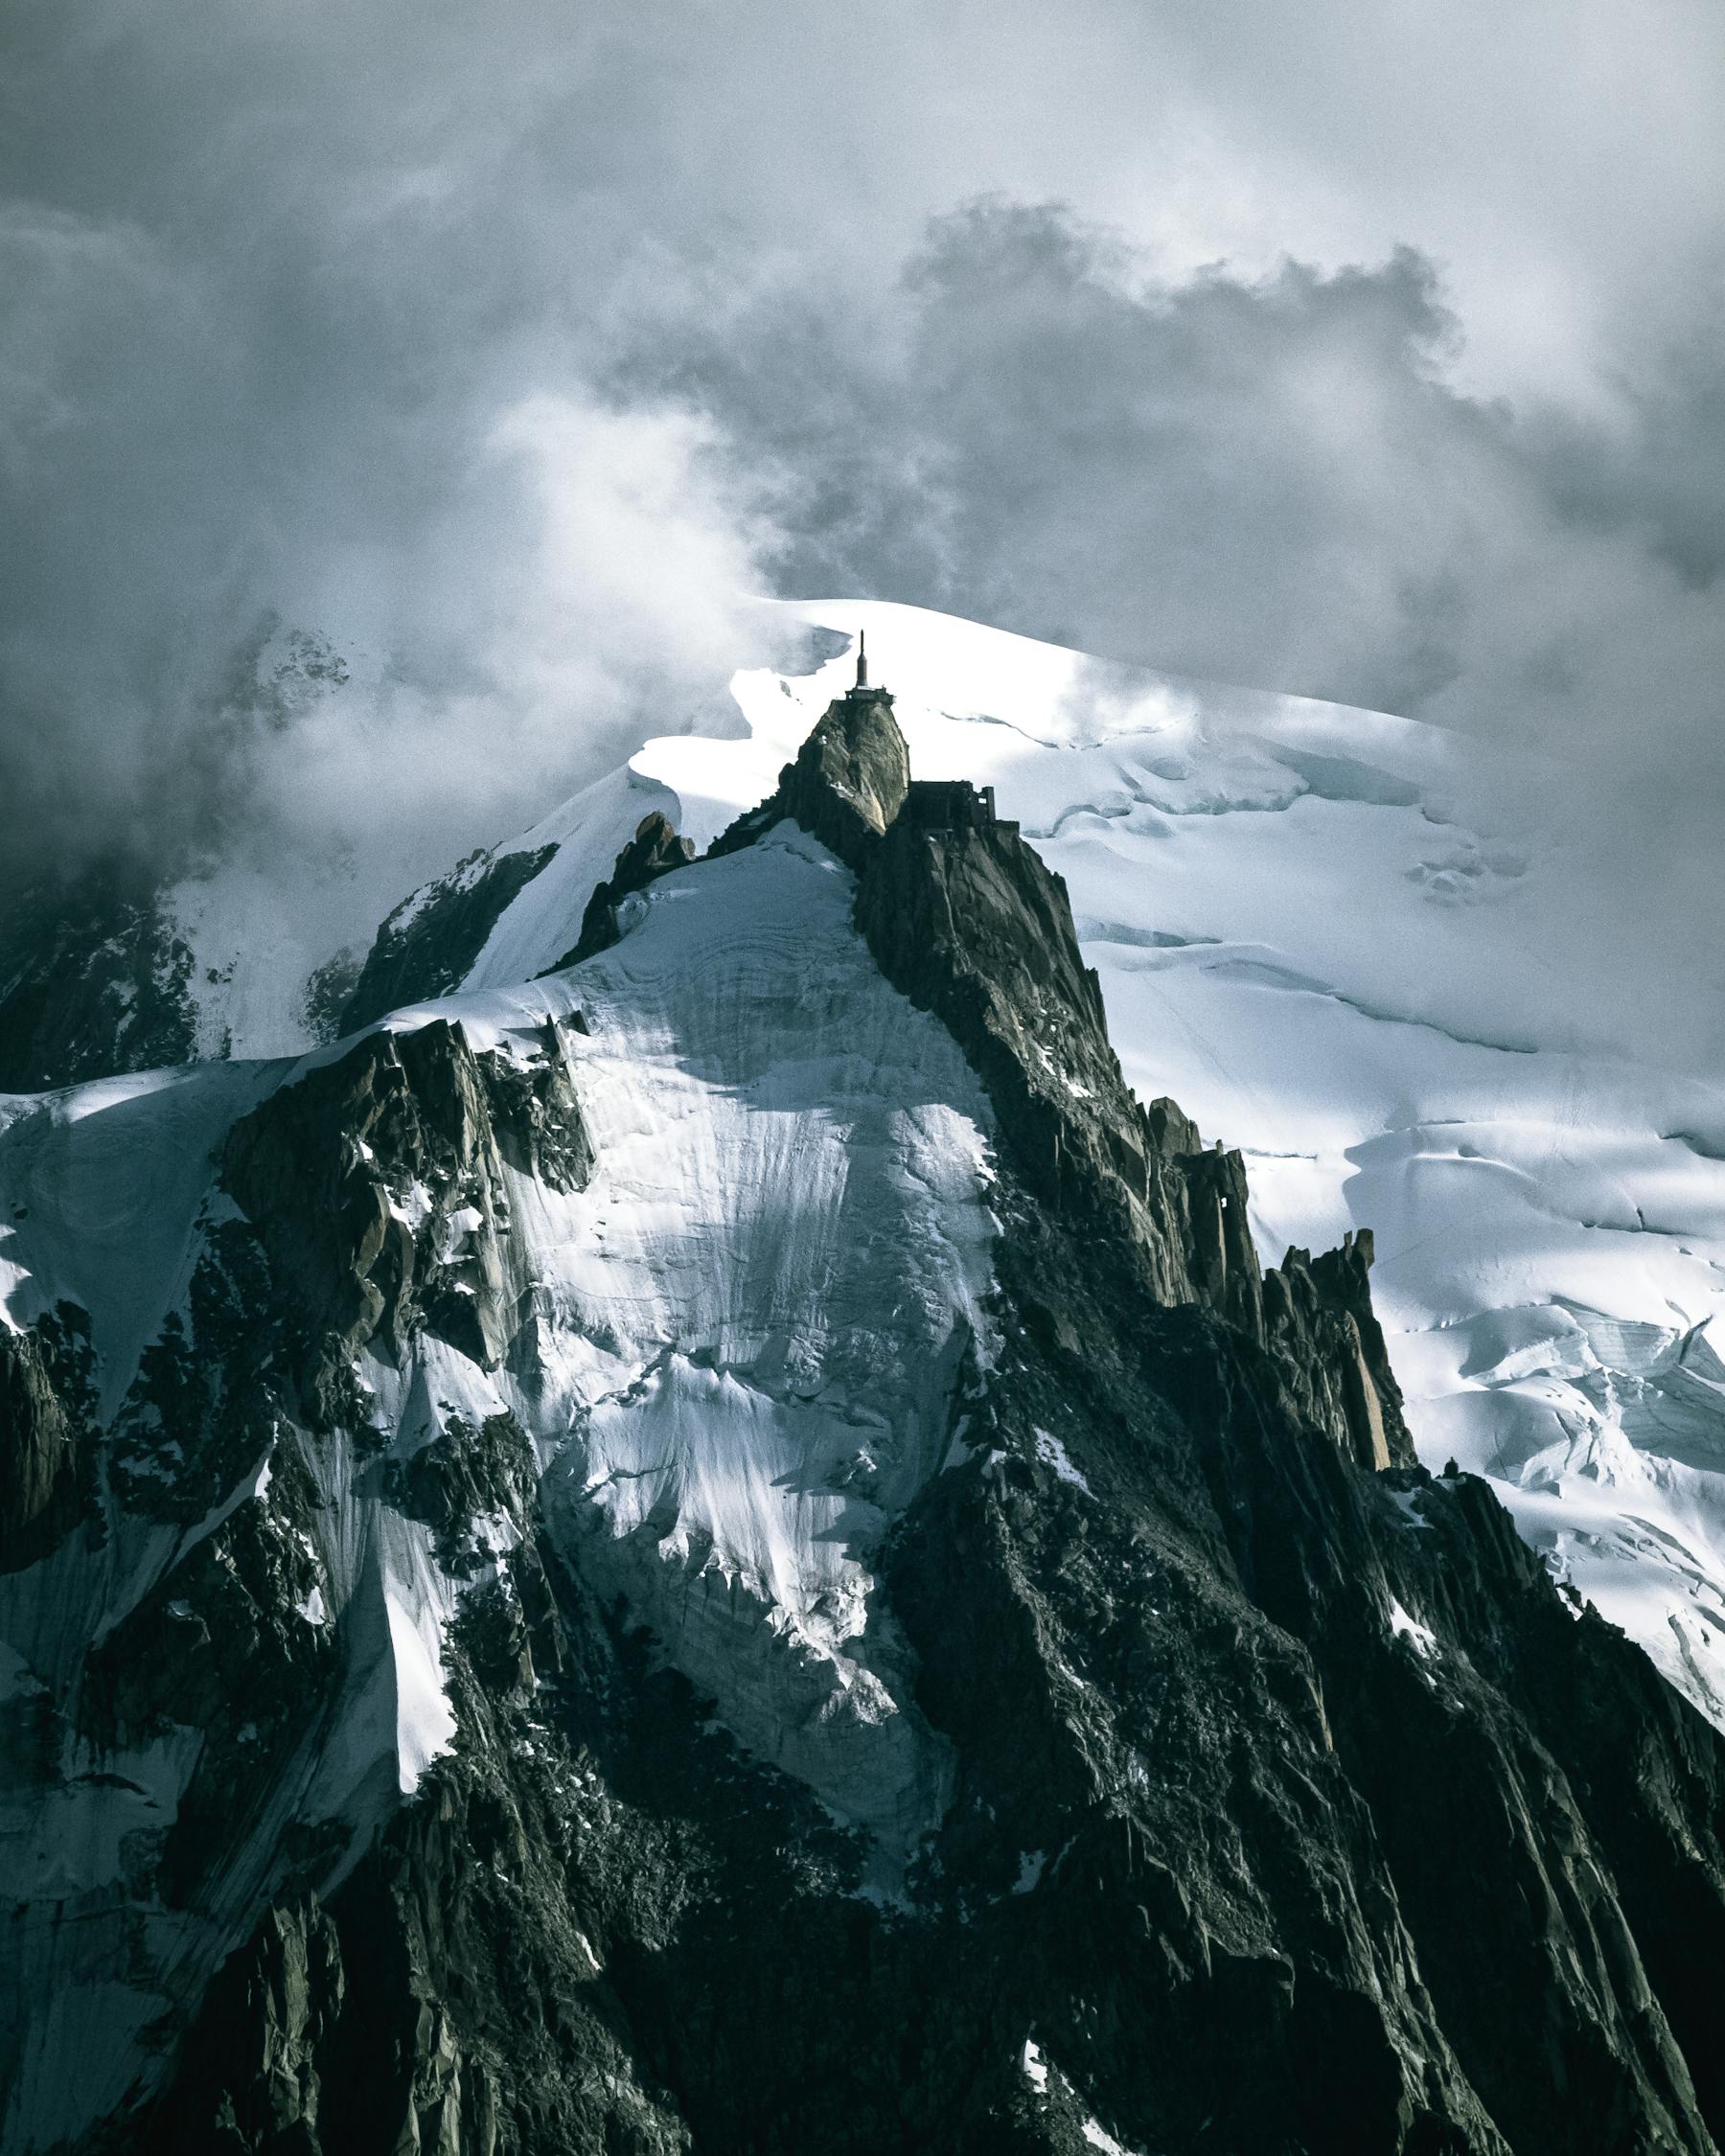 Snow Covered Mountain Under Cloudy Sky · Free Stock Photo